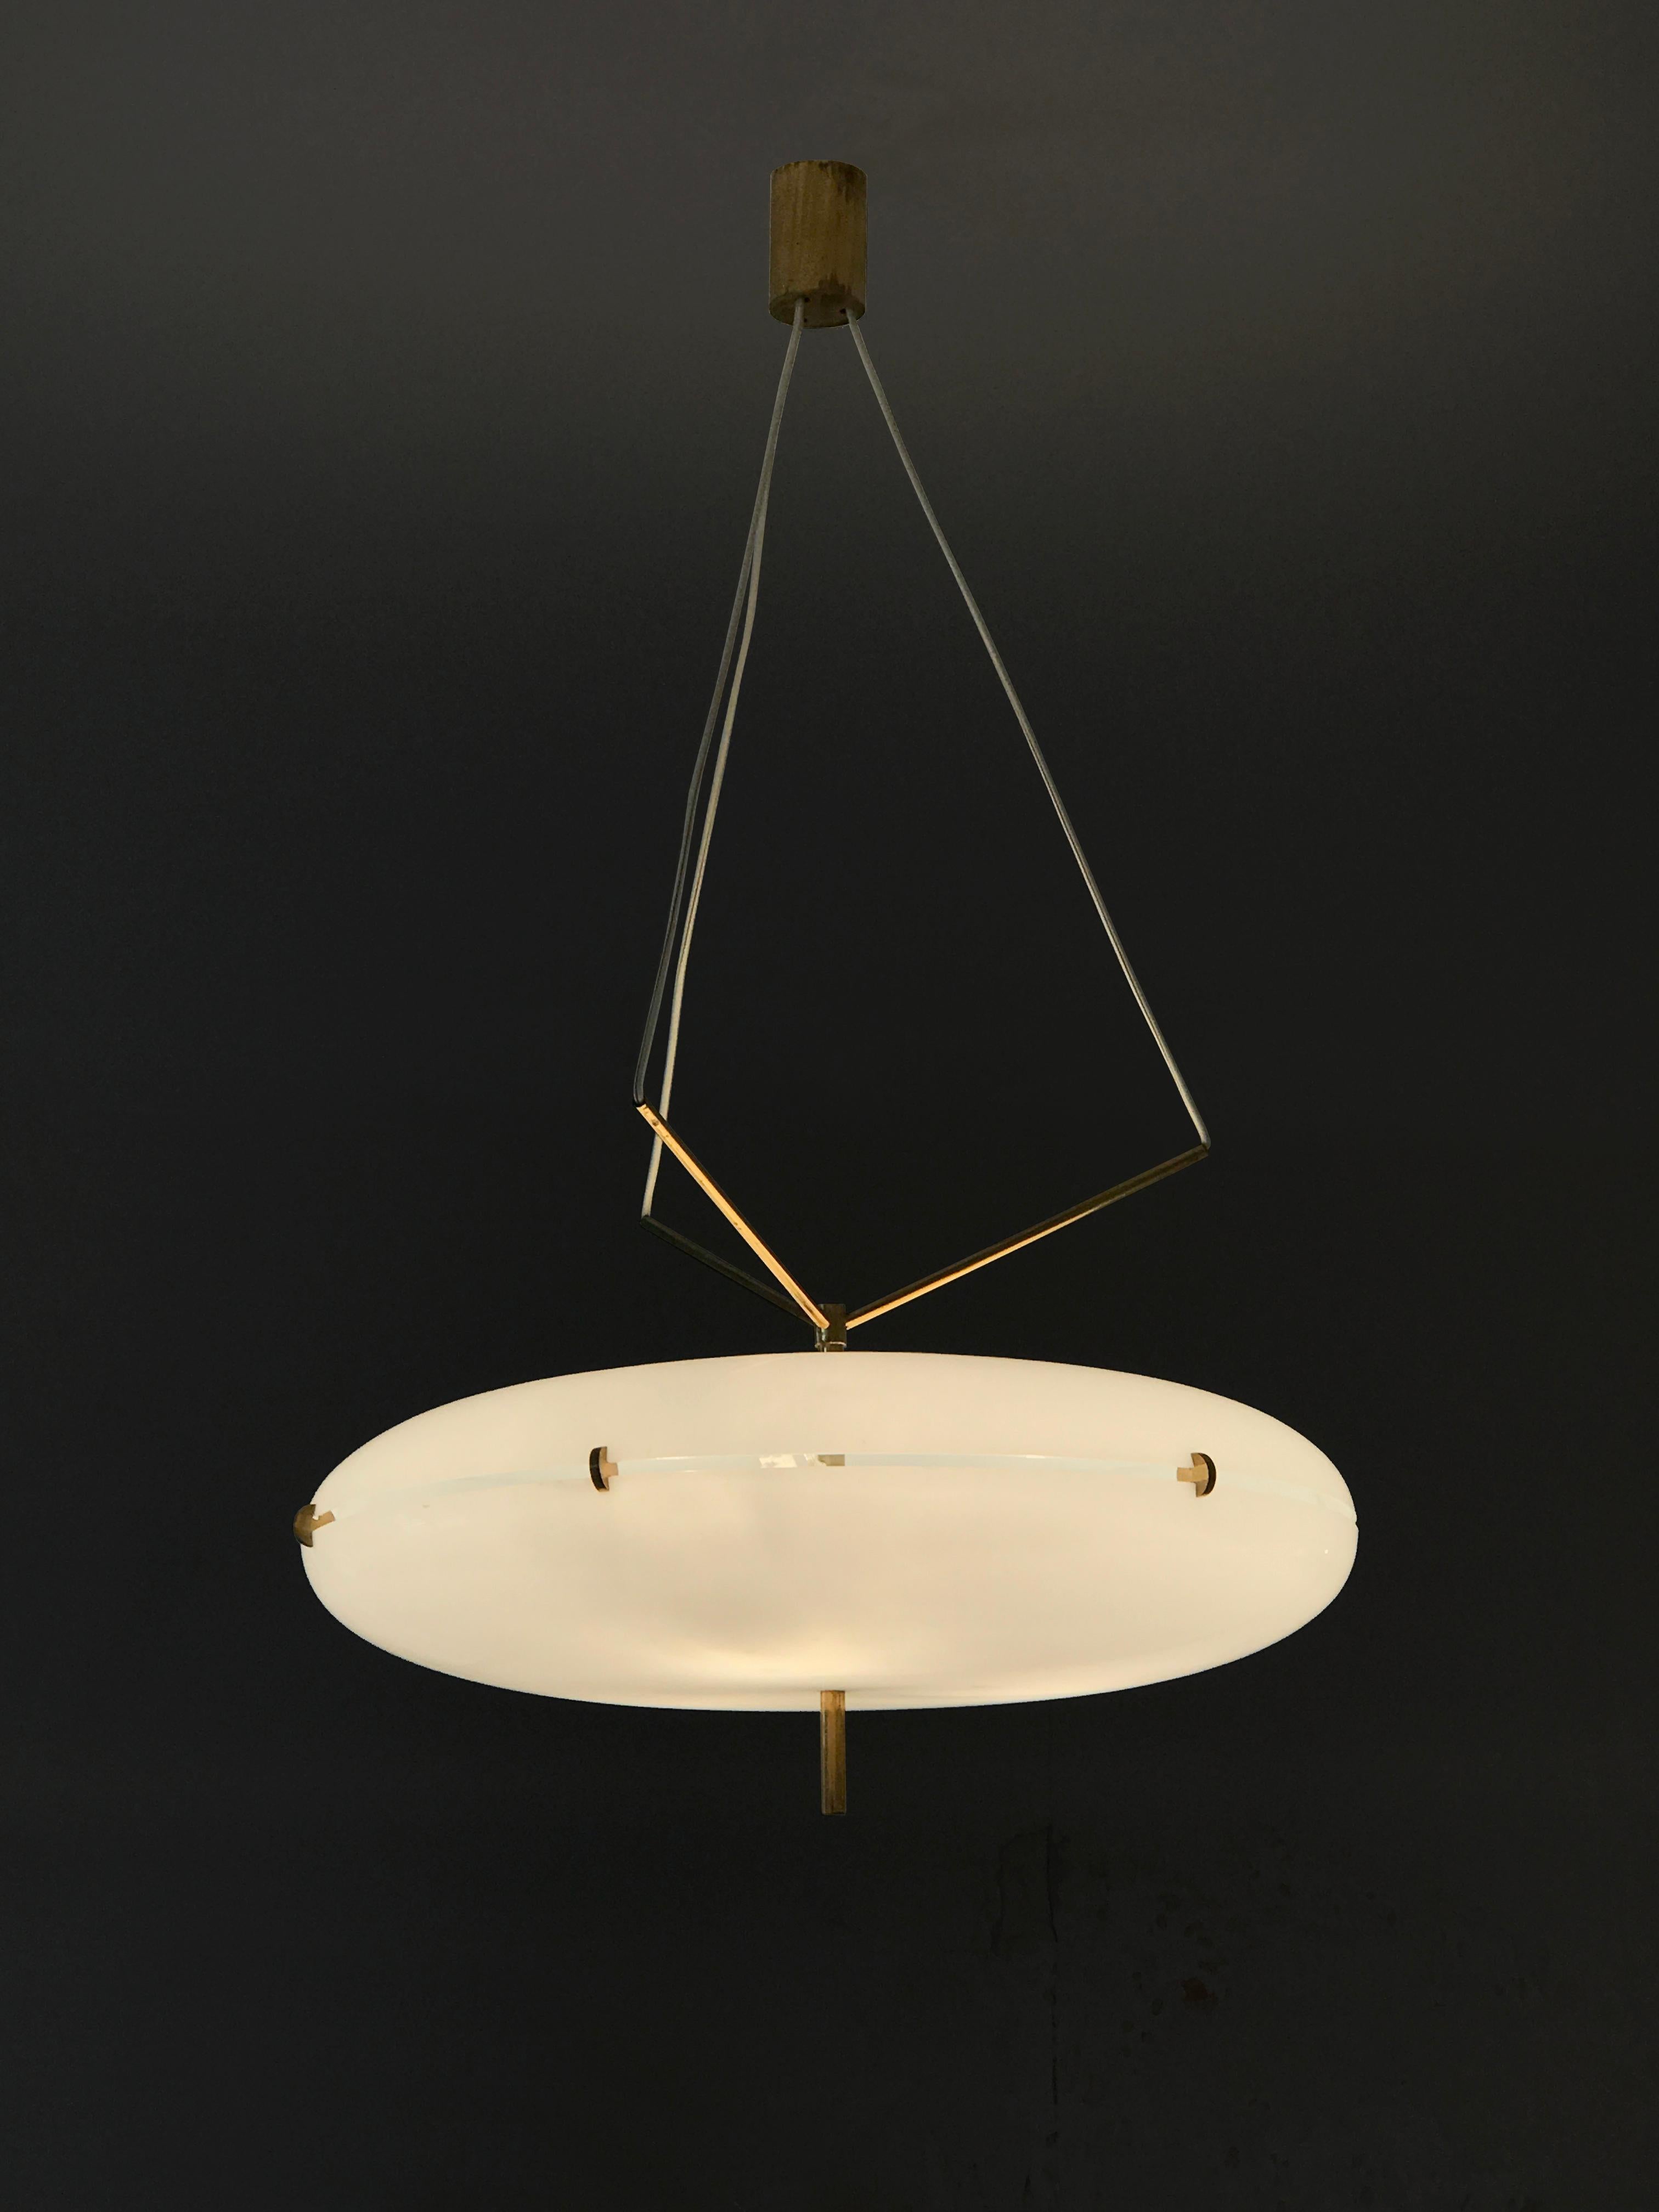 A MID-CENTURY-MODERN MODERNIST SPACE-AGE Ceiling Light by STILNOVO, Italy 1960  For Sale 5